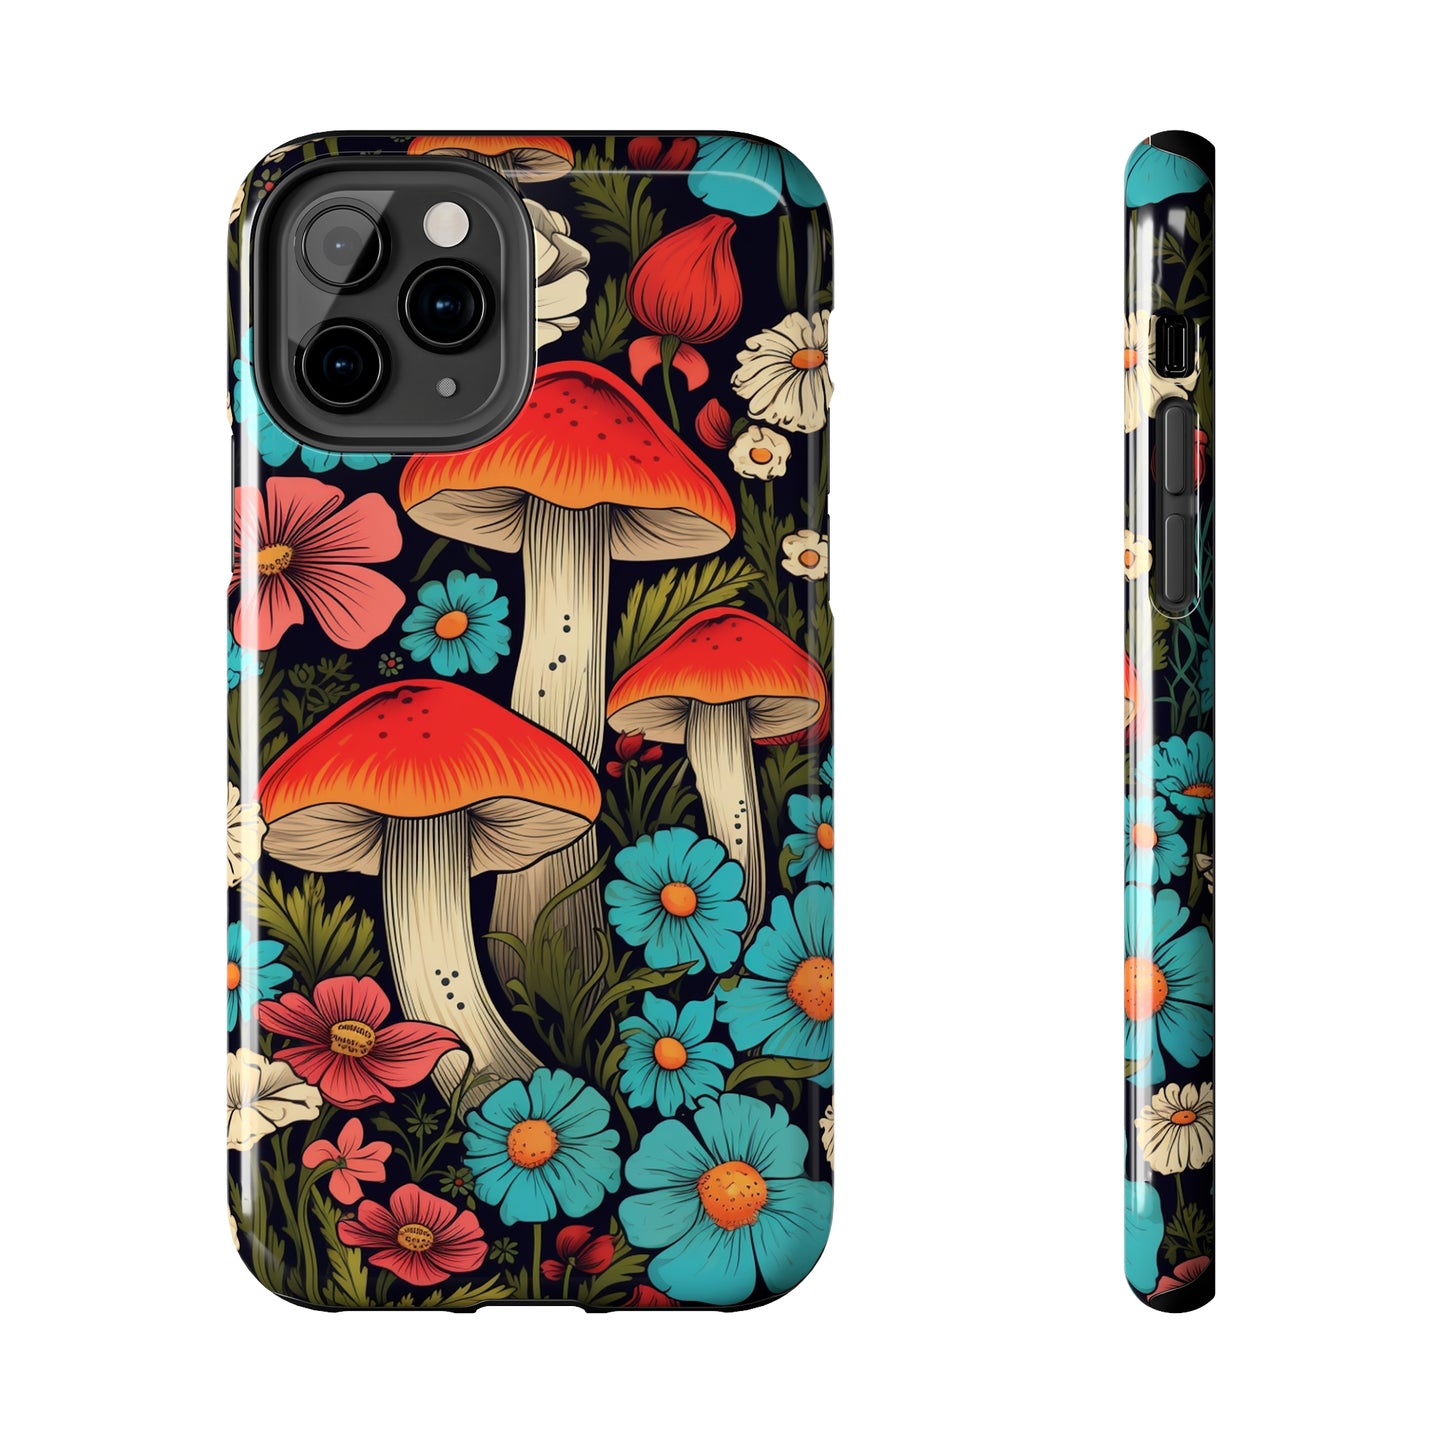 Psychedelic Retro Mushrooms iPhone case | Dive into Vintage Vibes